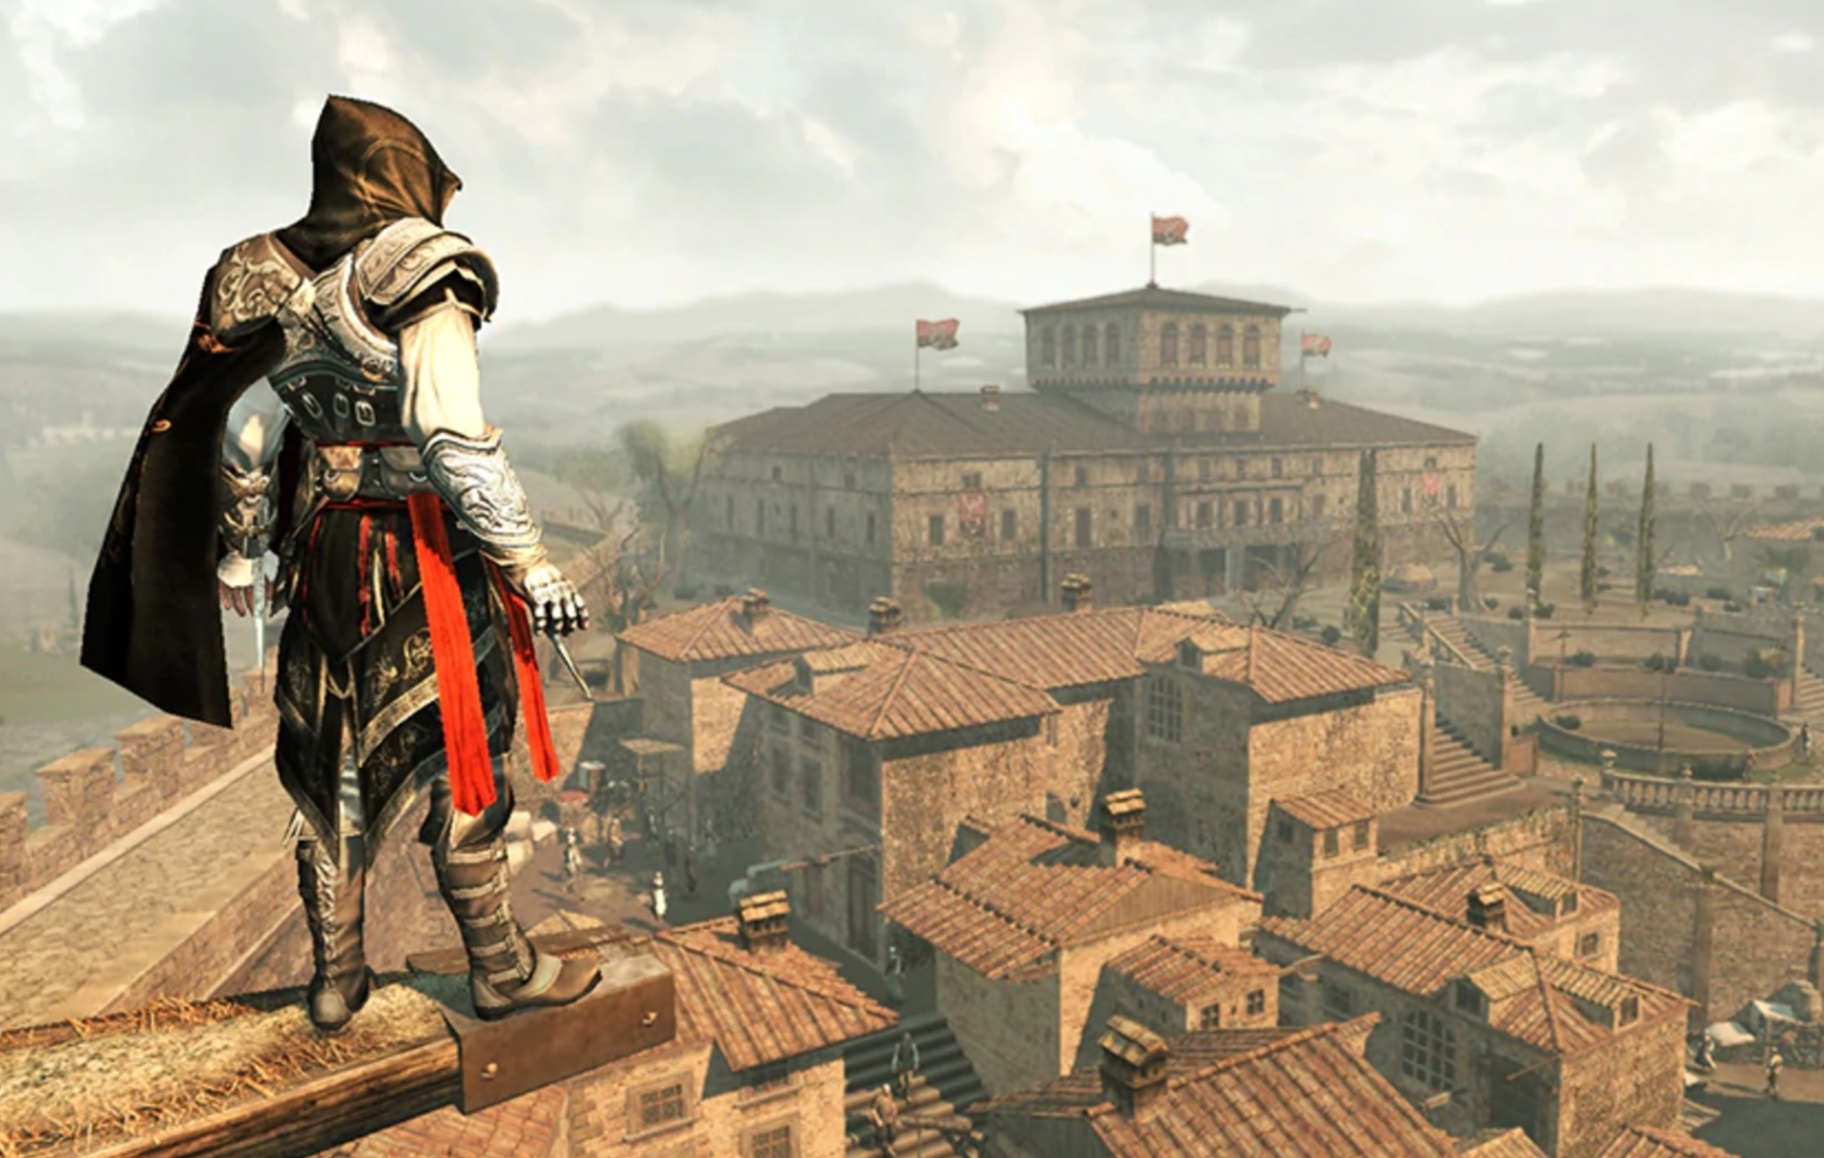 15 Facts Players May Not Know About Assassin's Creed